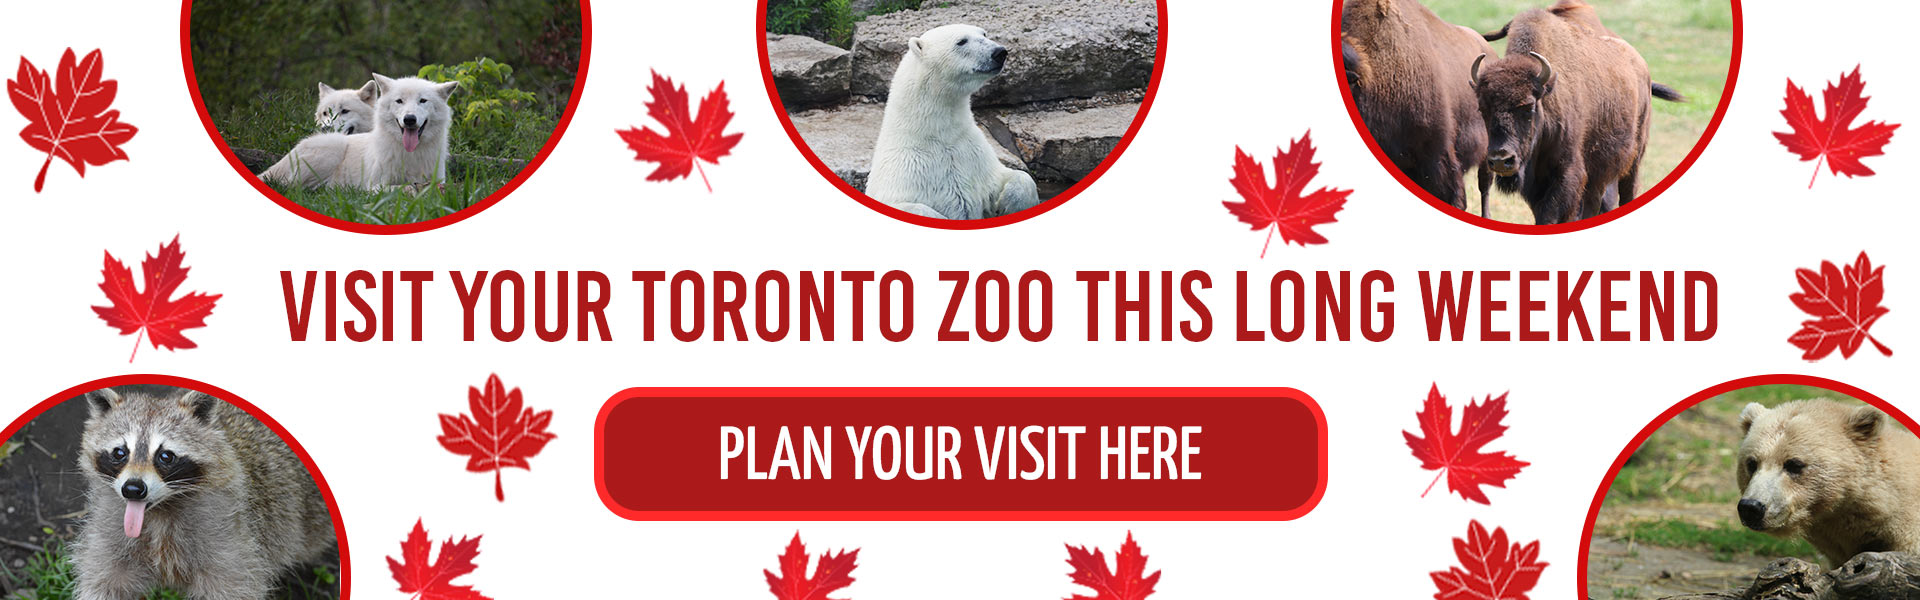 Visit your Toronto Zoo this long weekend